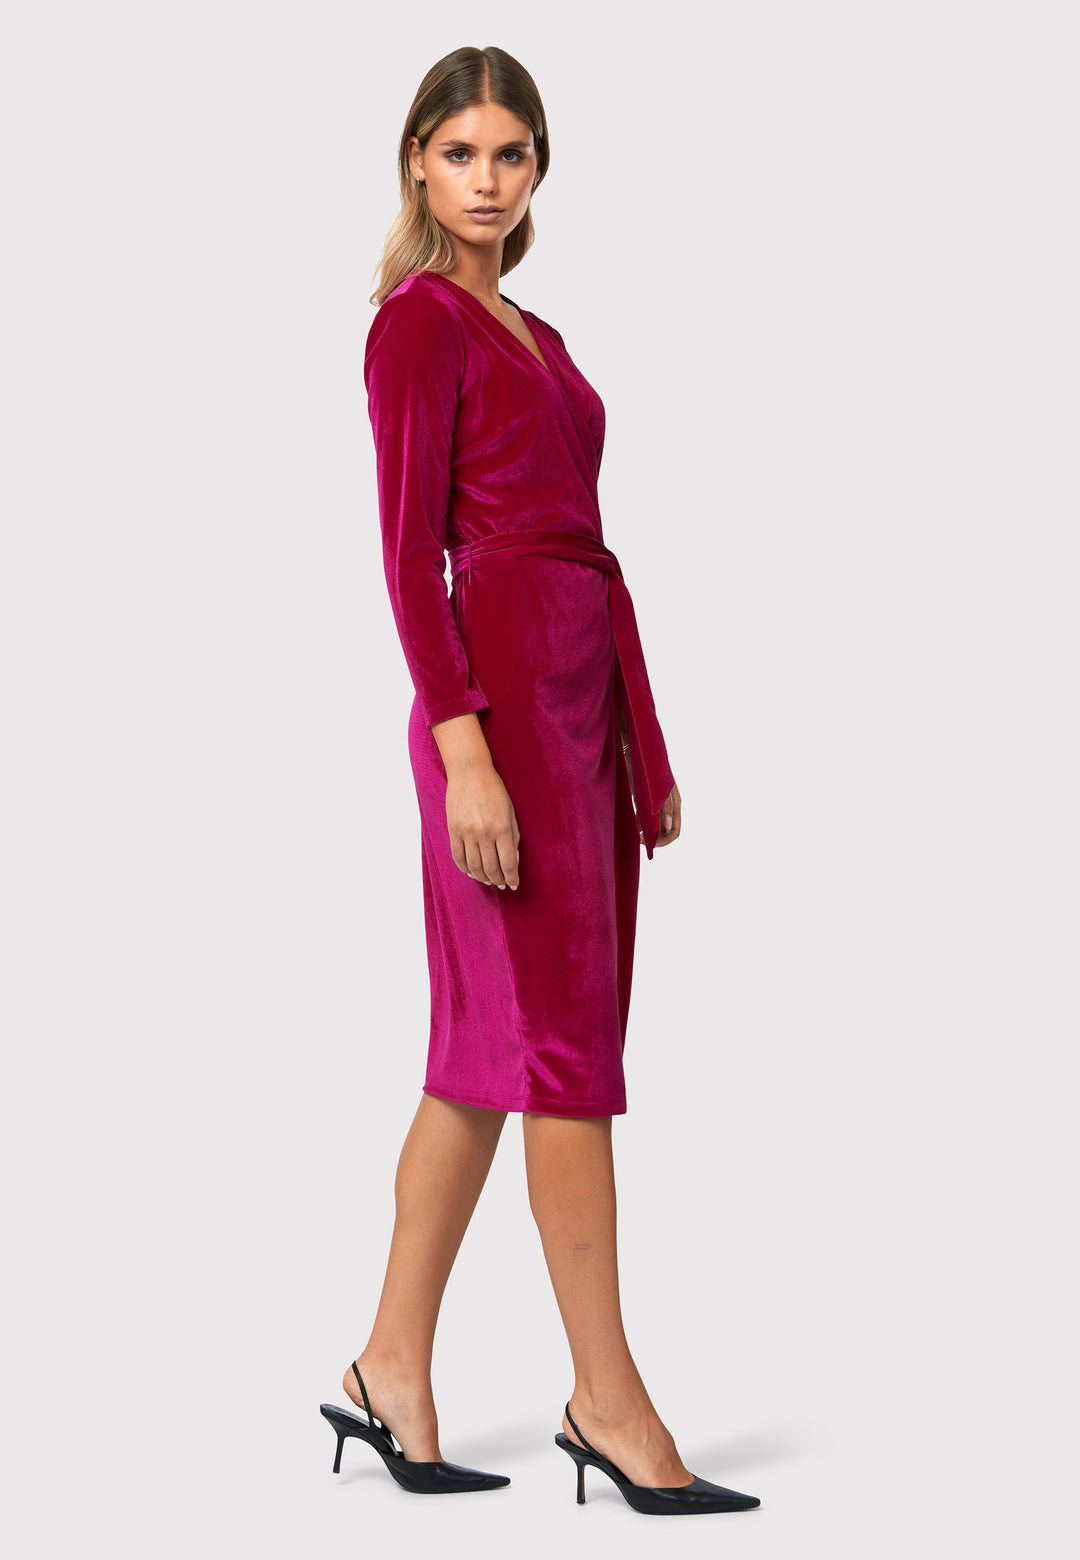 Introducing the Jordan Fuchsia Velvet Dress, a must-have addition to your winter wardrobe. This versatile dress combines luxurious stretch velvet a flattering v-neckline, offering a perfect blend of warmth, sophistication, and style. The faux wrap design creates a feminine silhouette that transitions seamlessly from desk to dinner, while the detachable belt allows you to customize your look to suit any occasion. 